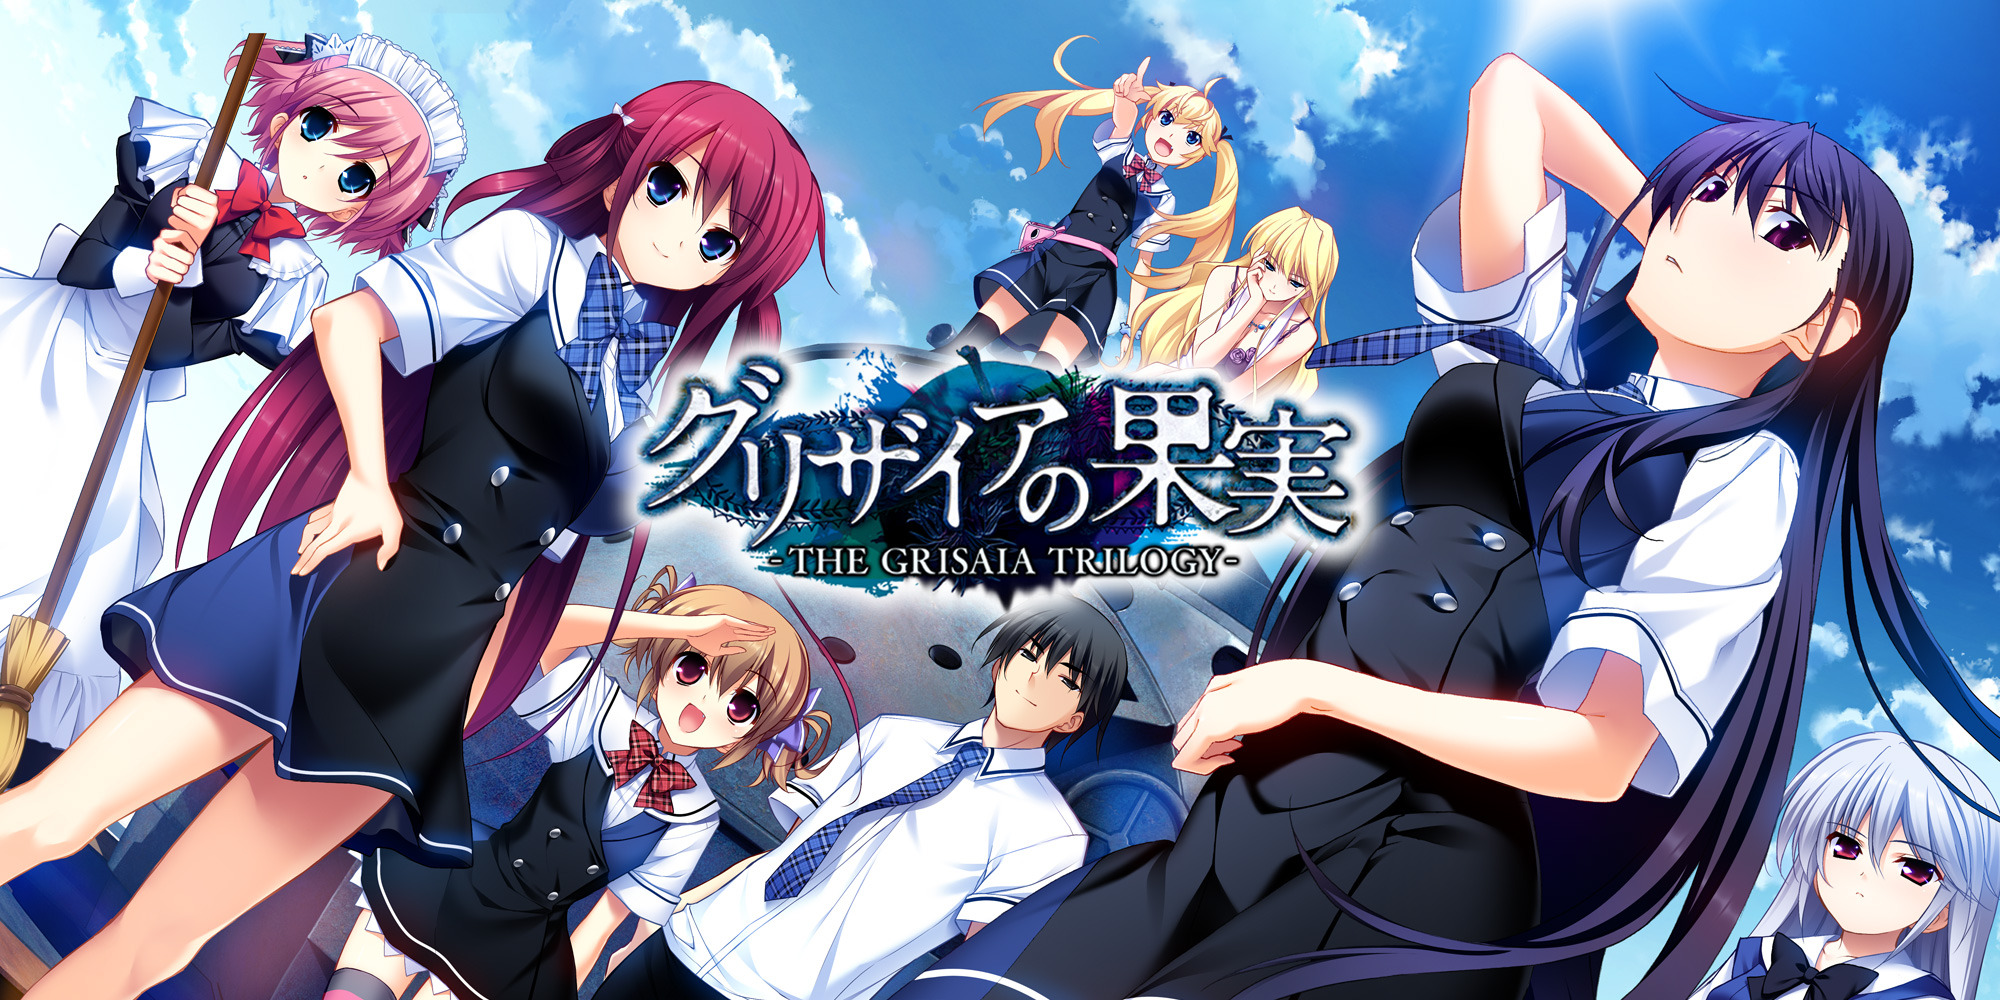 The Eden of Grisaia The Cocoon of Caprice IV - Watch on Crunchyroll